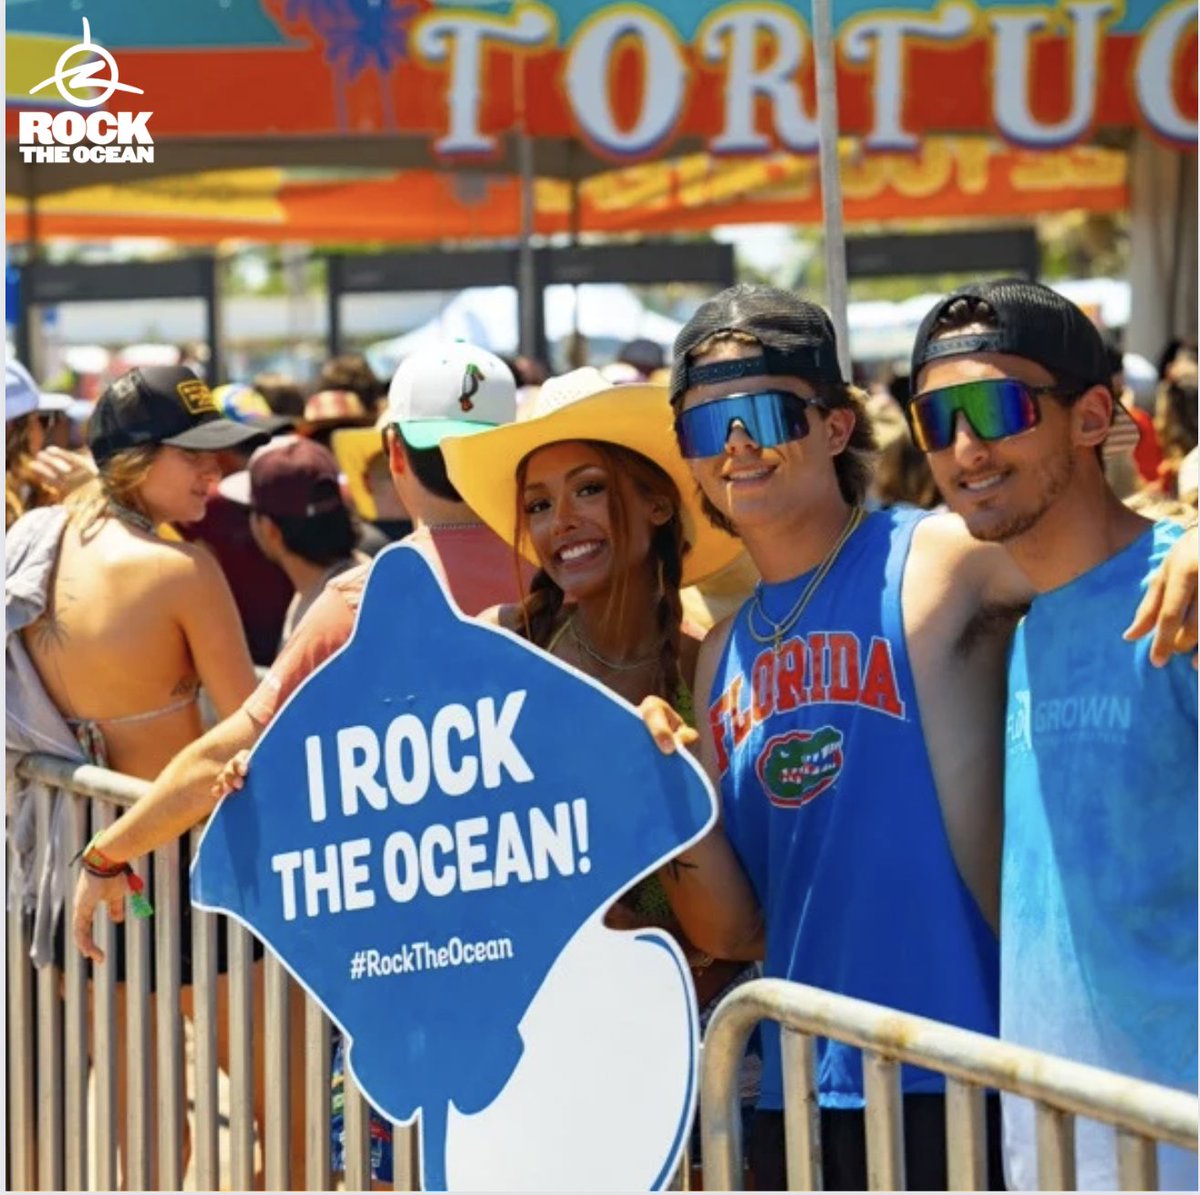 How do you #RockTheOcean in your daily life? 

Whether you're skipping single-use plastics or composting & recycling at home, you're making a difference. Let's #RockTheOcean everyday!  🌊🐠